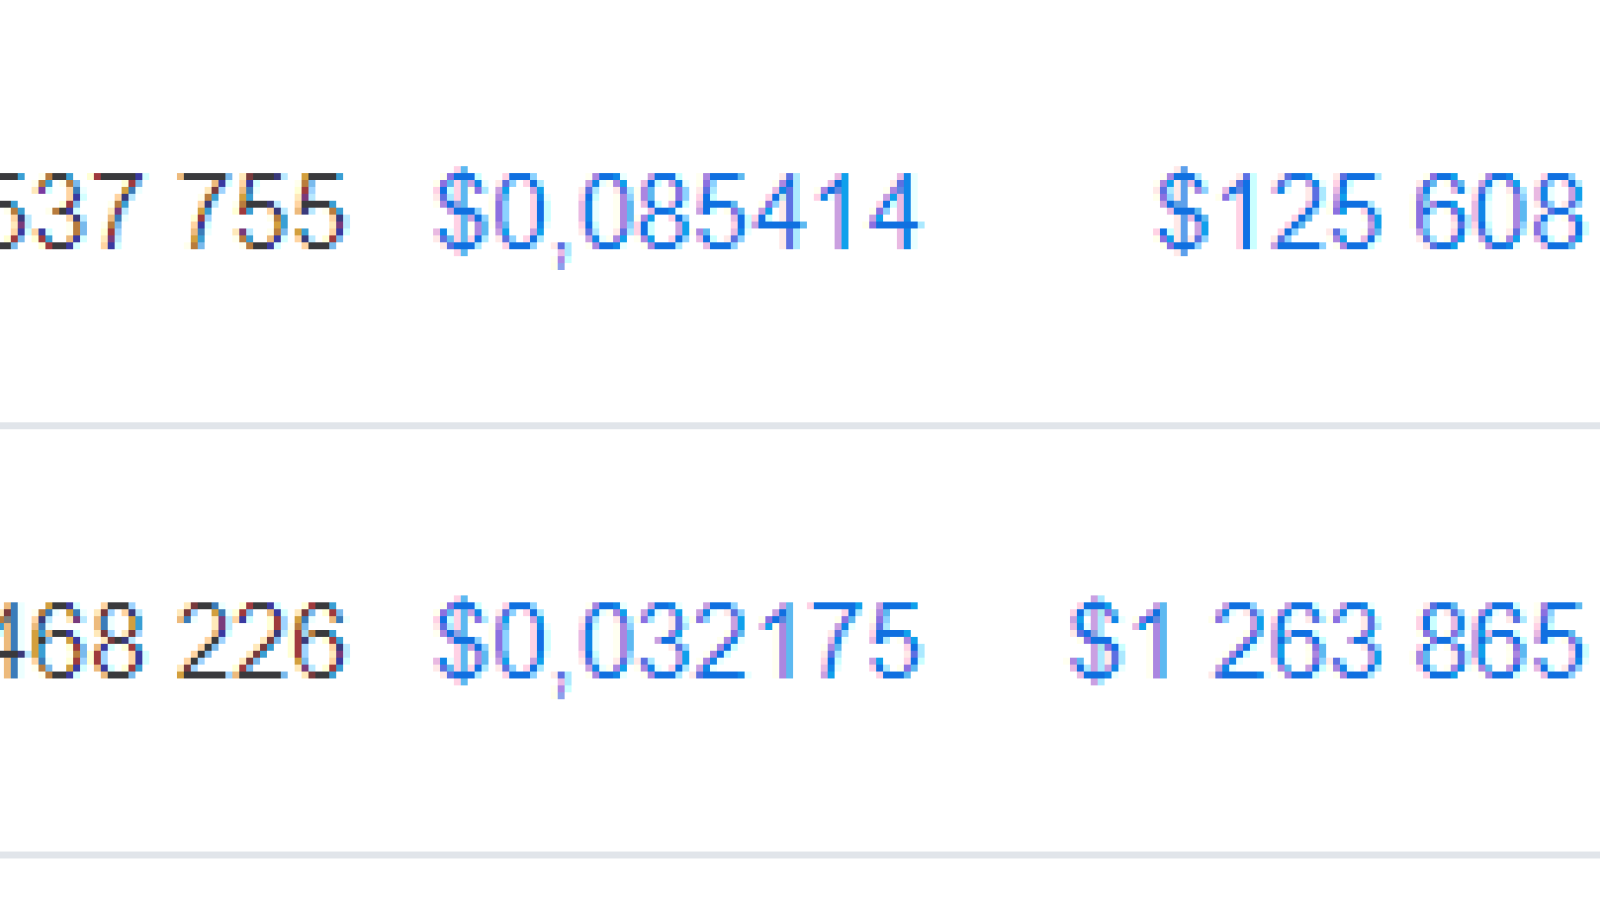 Tron and Litecoin are the top market gainers